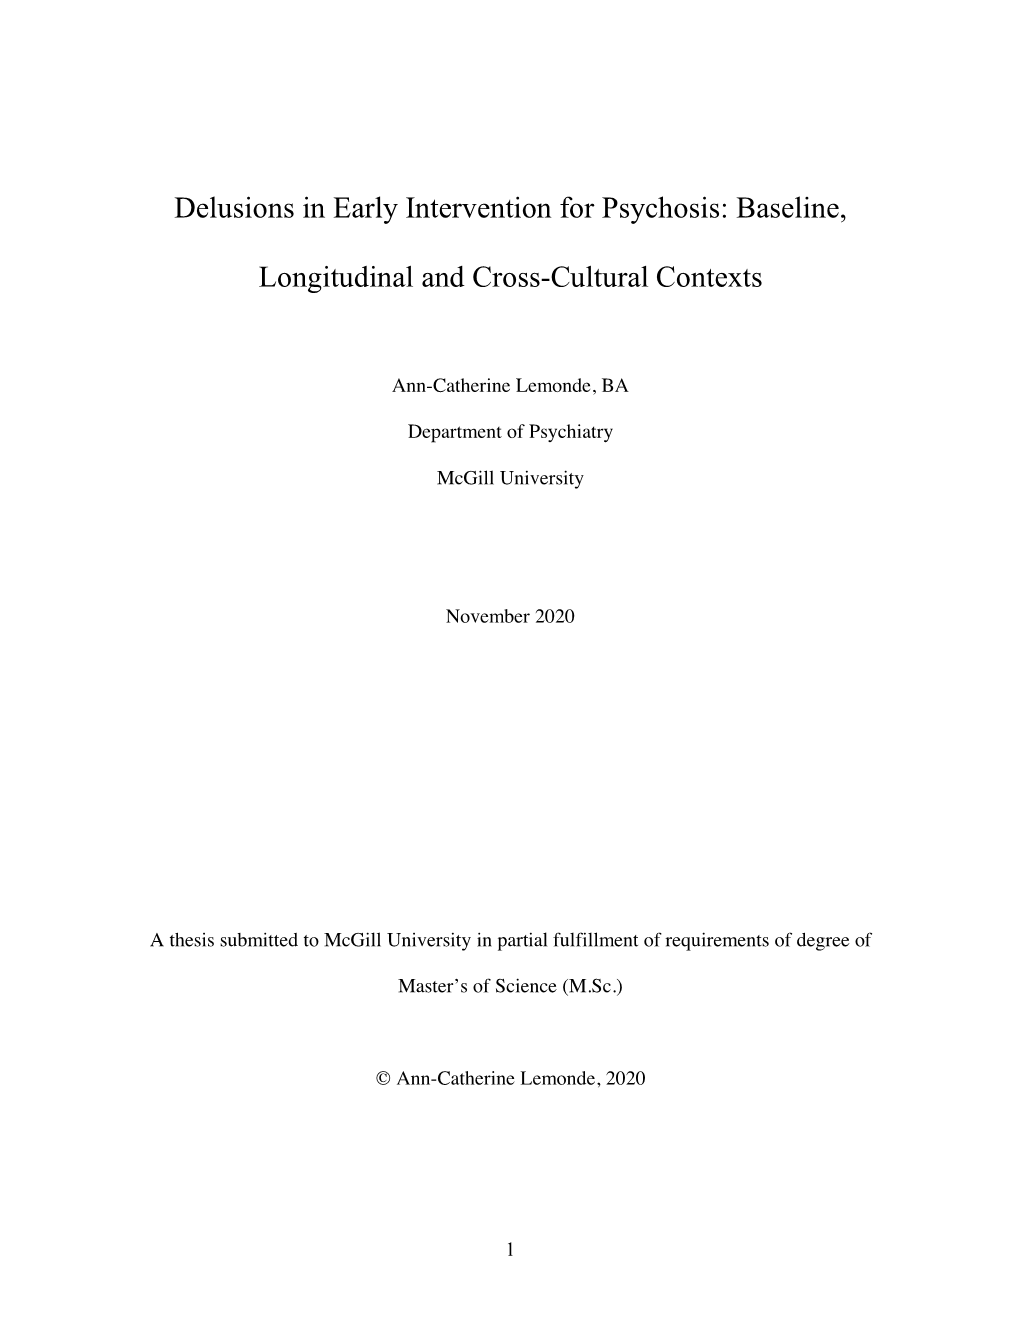 Delusions in Early Intervention for Psychosis: Baseline